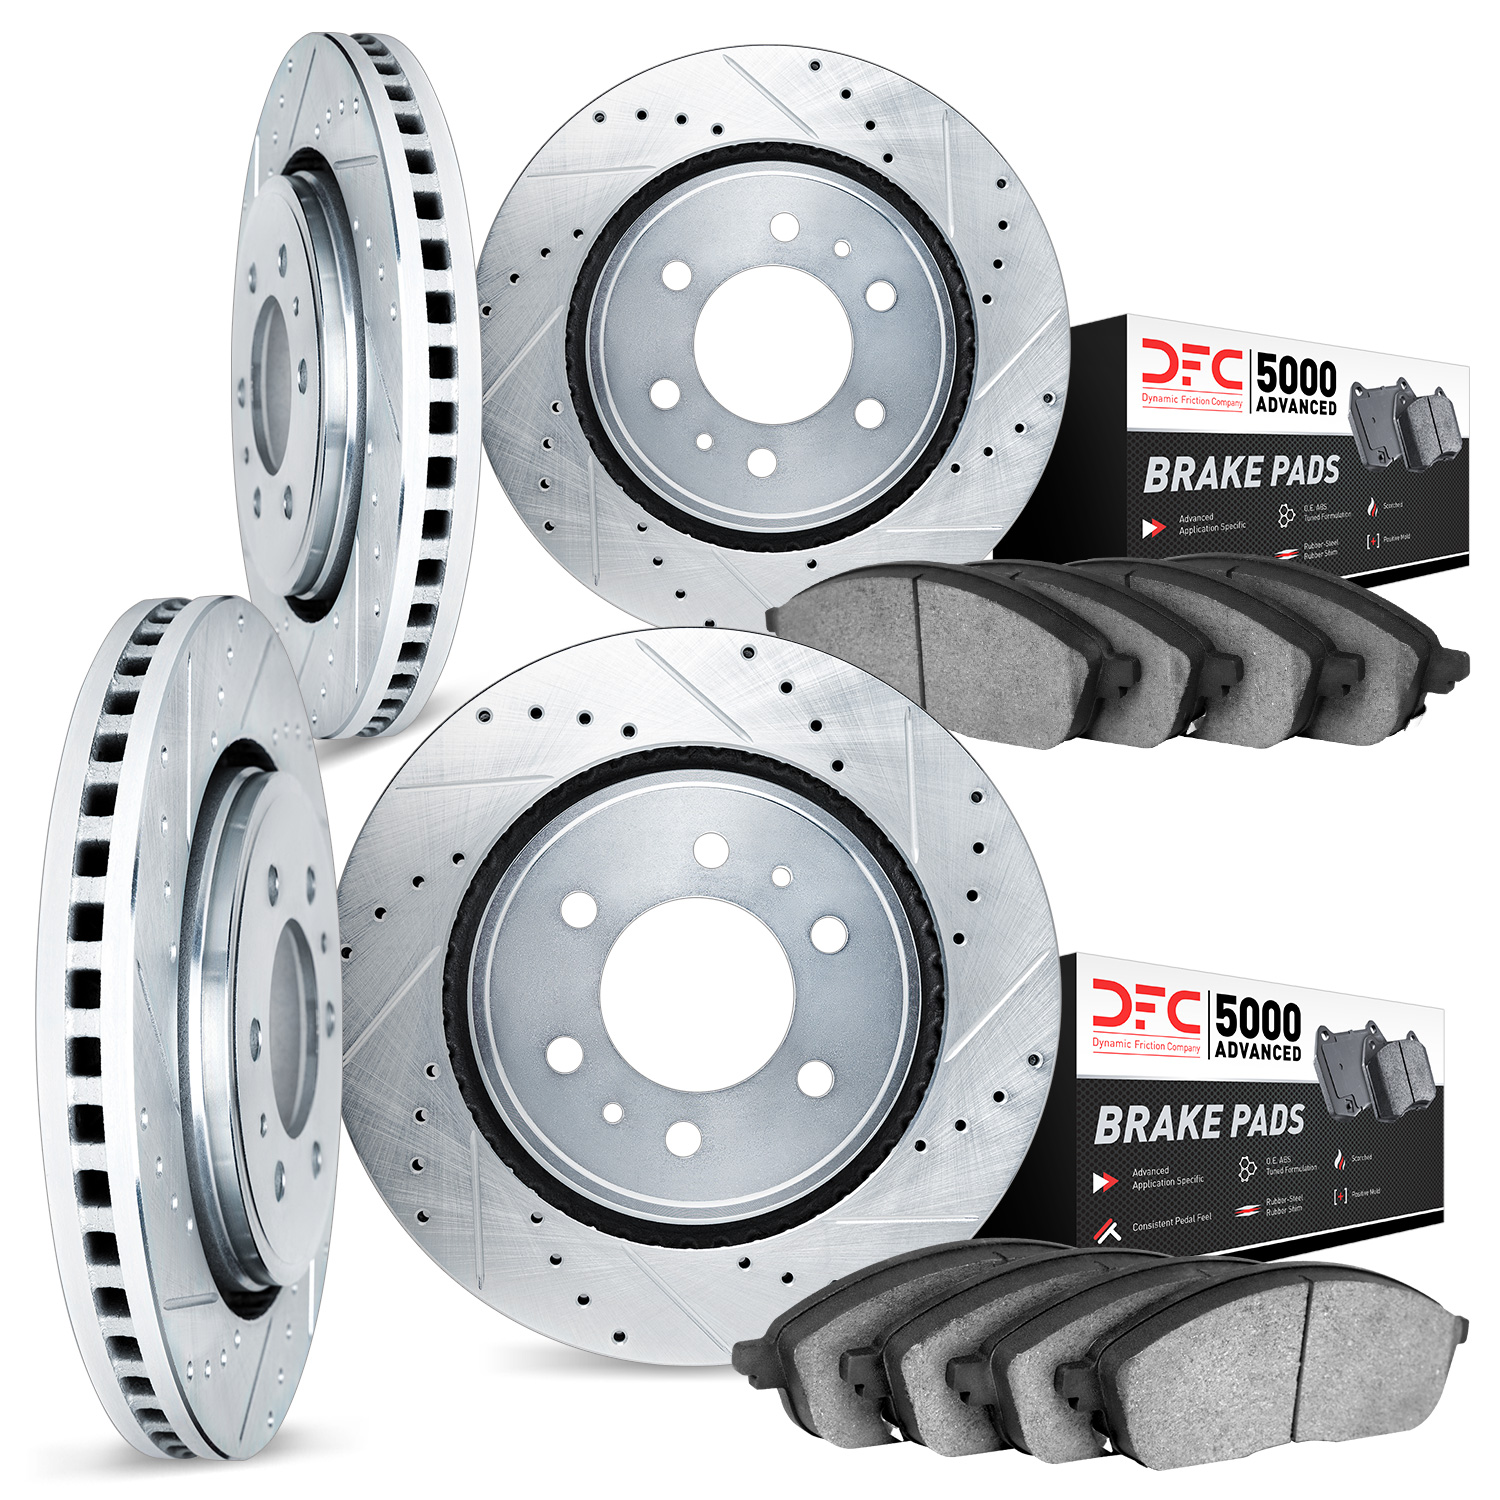 7504-68011 Drilled/Slotted Brake Rotors w/5000 Advanced Brake Pads Kit [Silver], Fits Select Infiniti/Nissan, Position: Front an